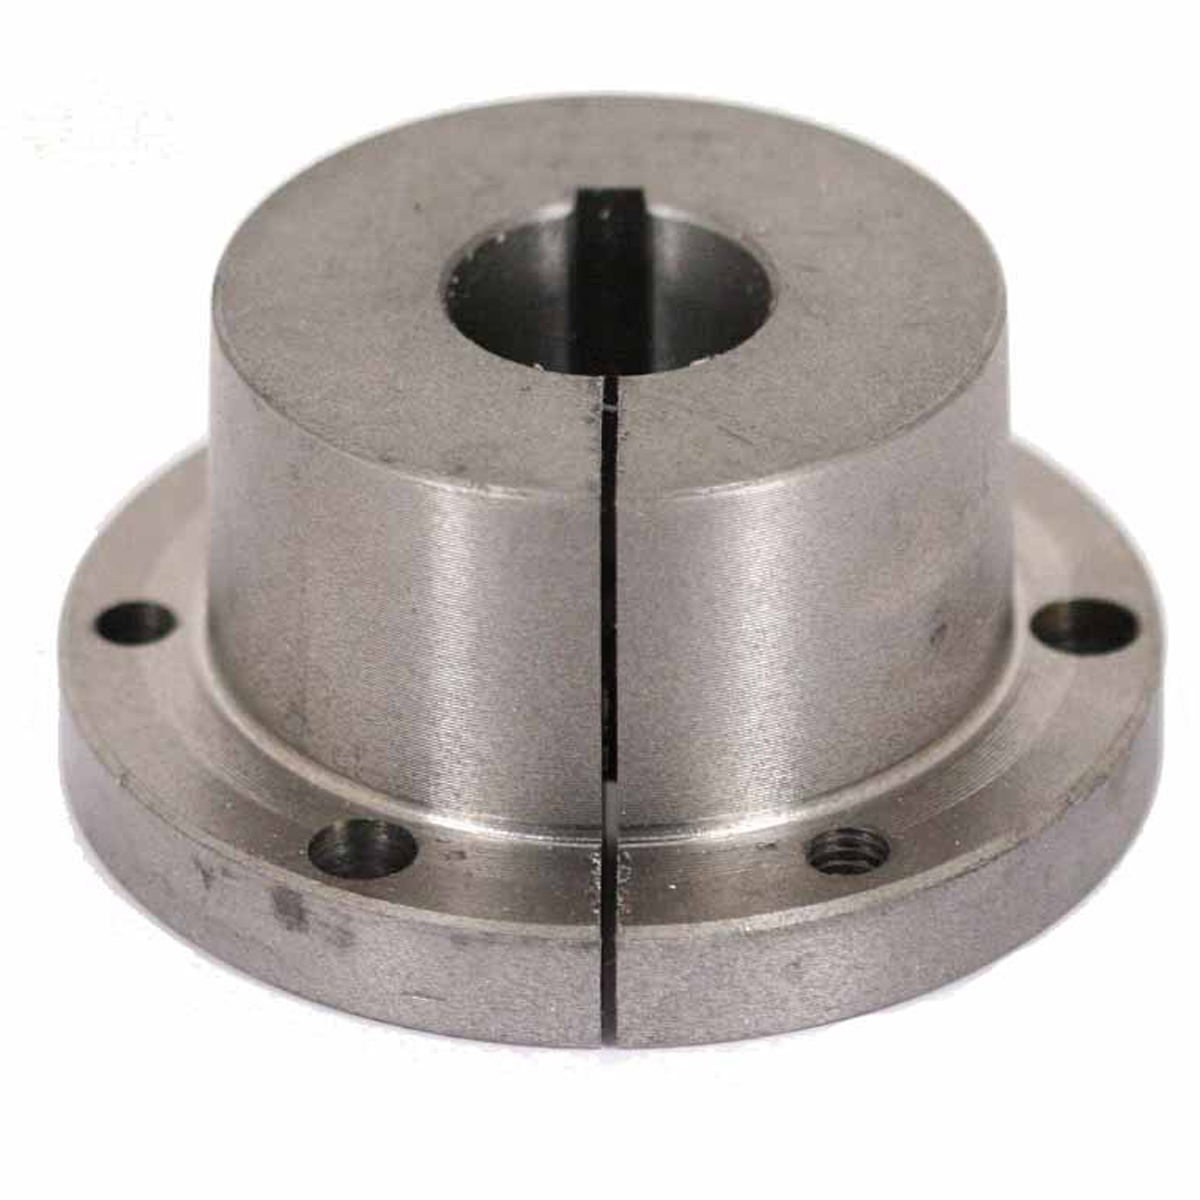 Tapered Bushing SK 1-7/8 New 